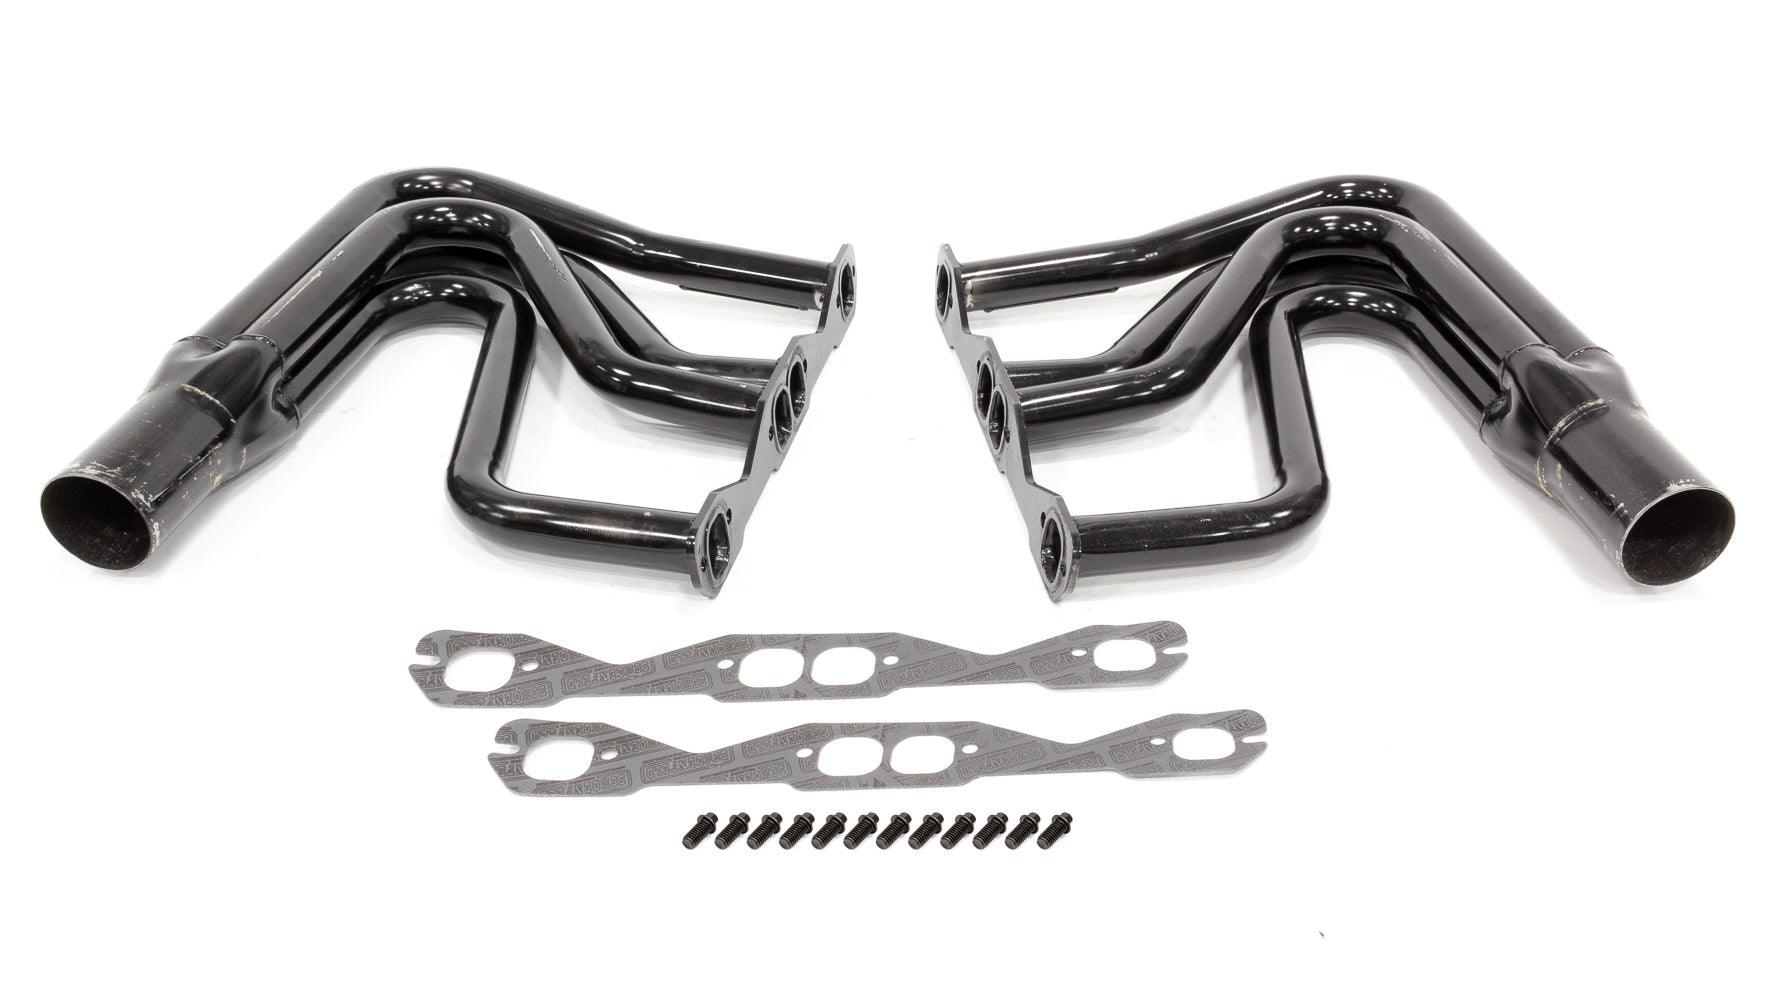 D.I.R.T Modified Header 602 Crate 1-5/8in - Burlile Performance Products